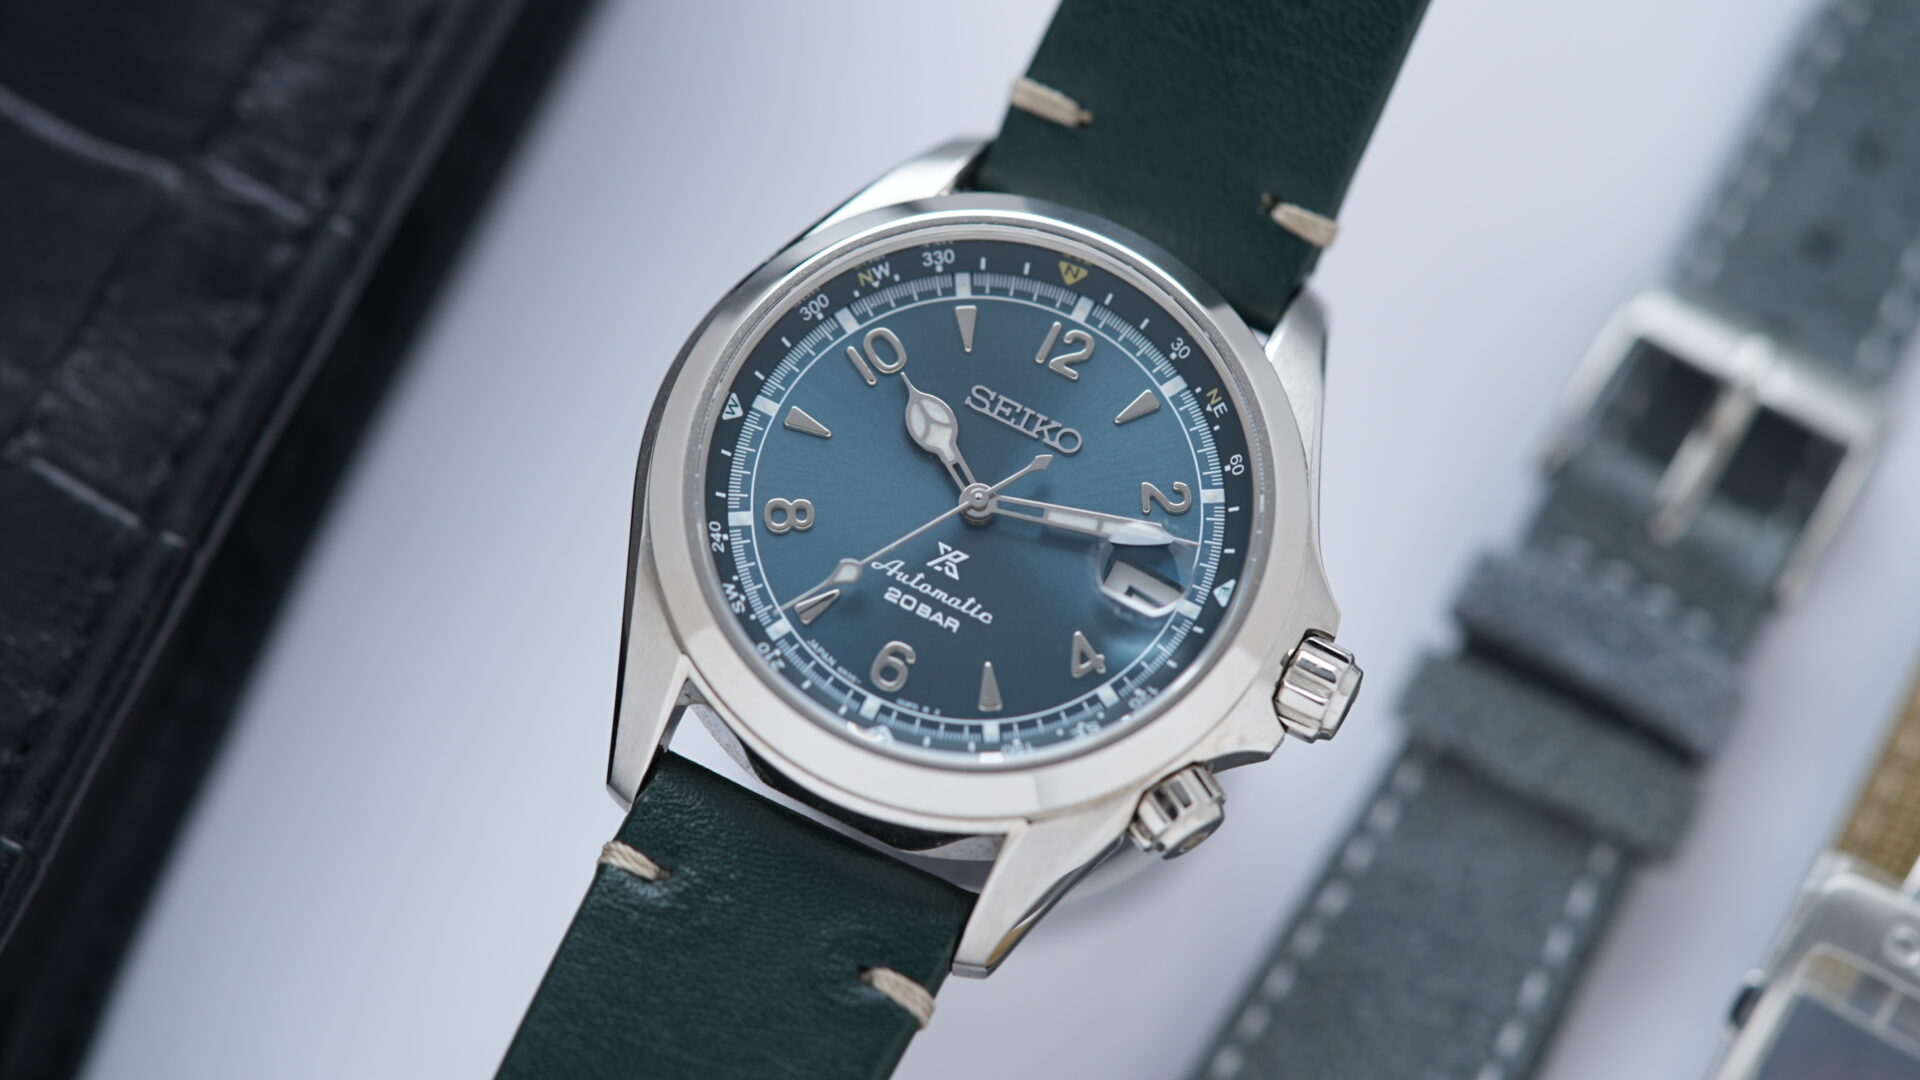 Seiko Alpinist Limited Edition Alpinist Mountain Glacier SPB199J1 watch on display featuring the full set.